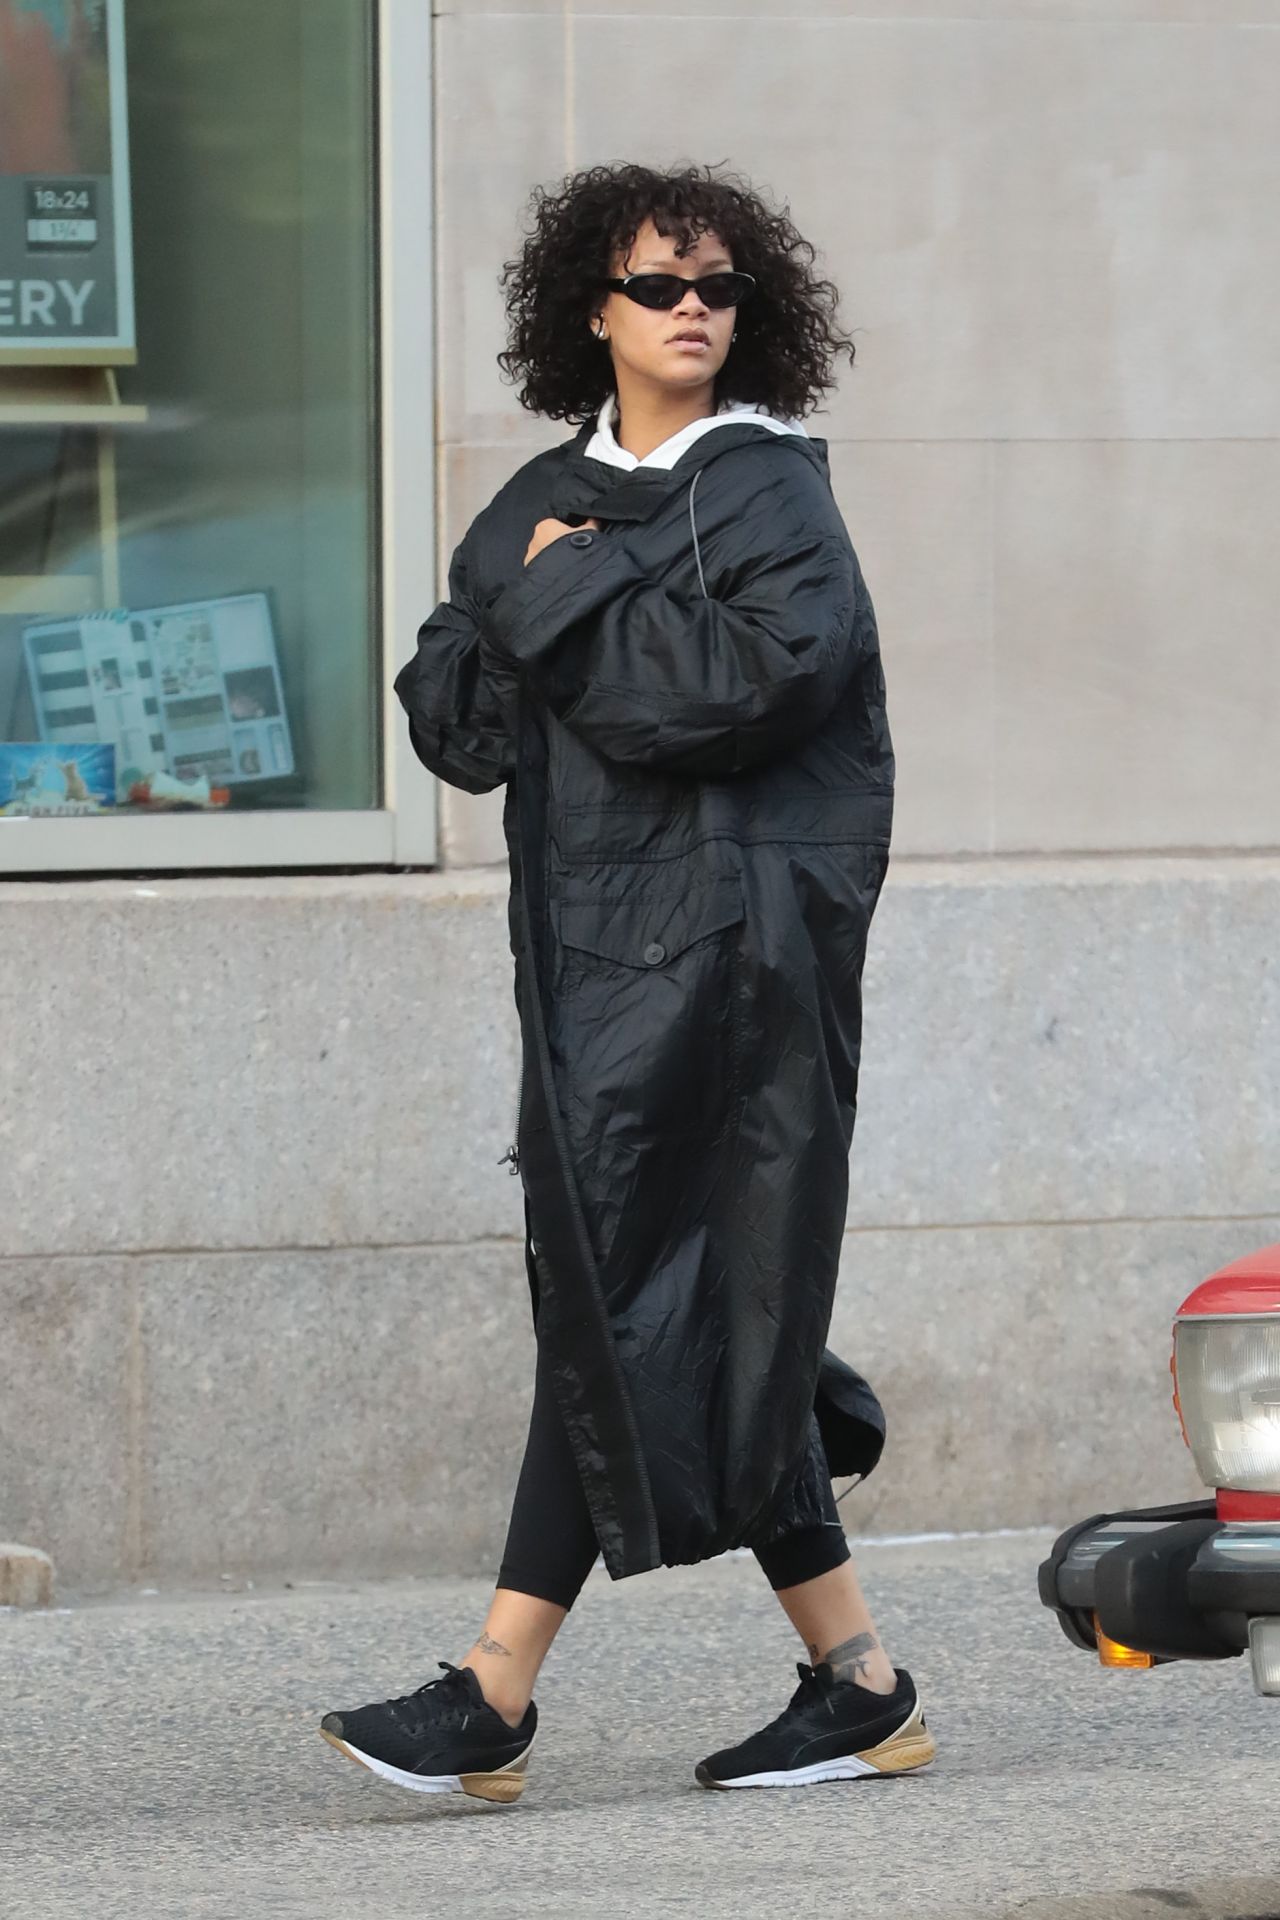 Rihanna Out in NYC, January 24, 2017 – Star Style